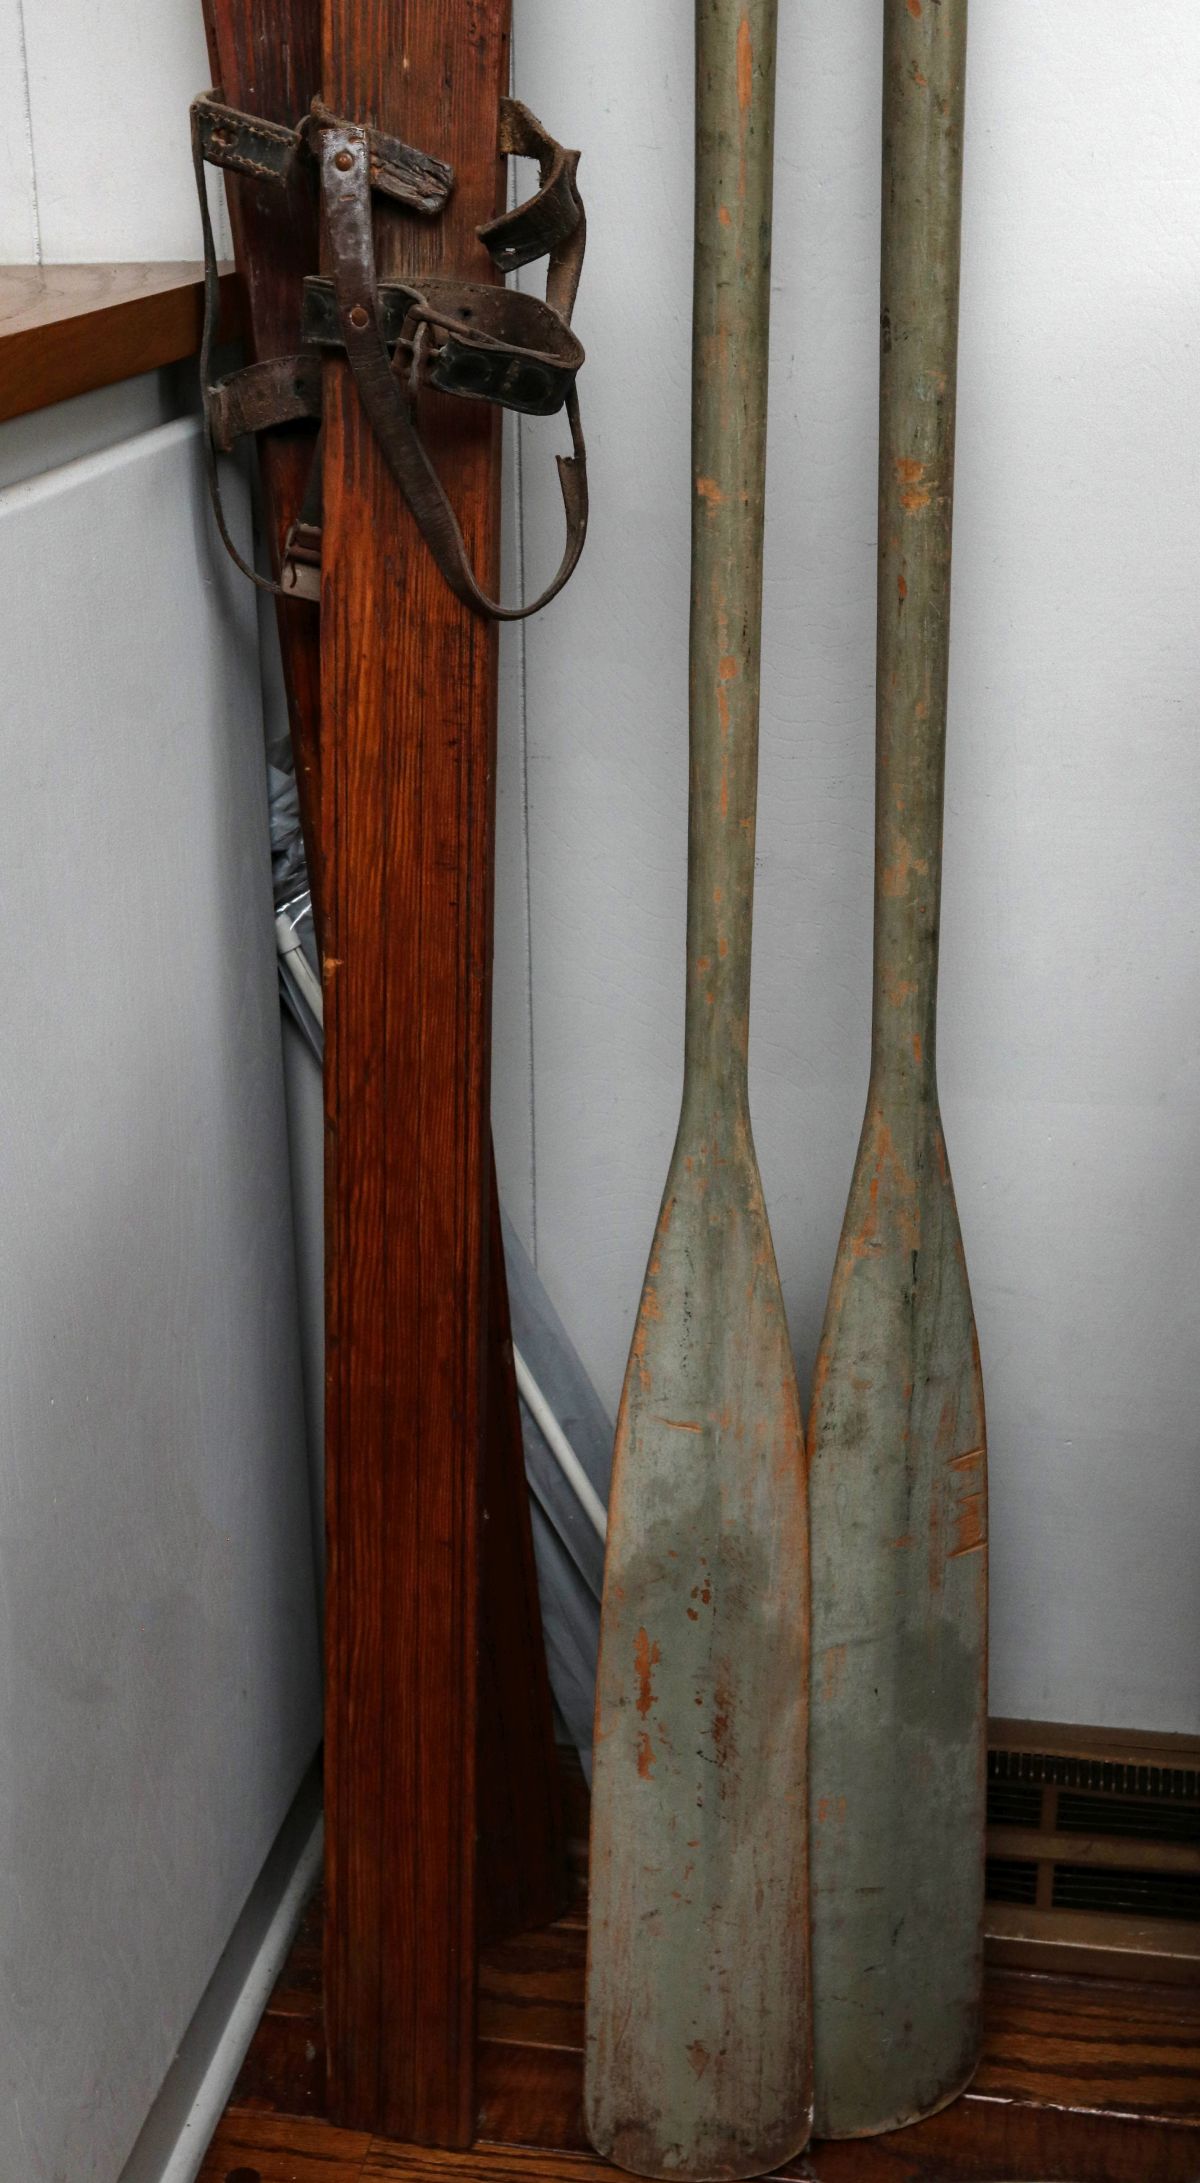 WOOD SKI PAIR AND BOAT OARS IN OLD GREEN PAINT